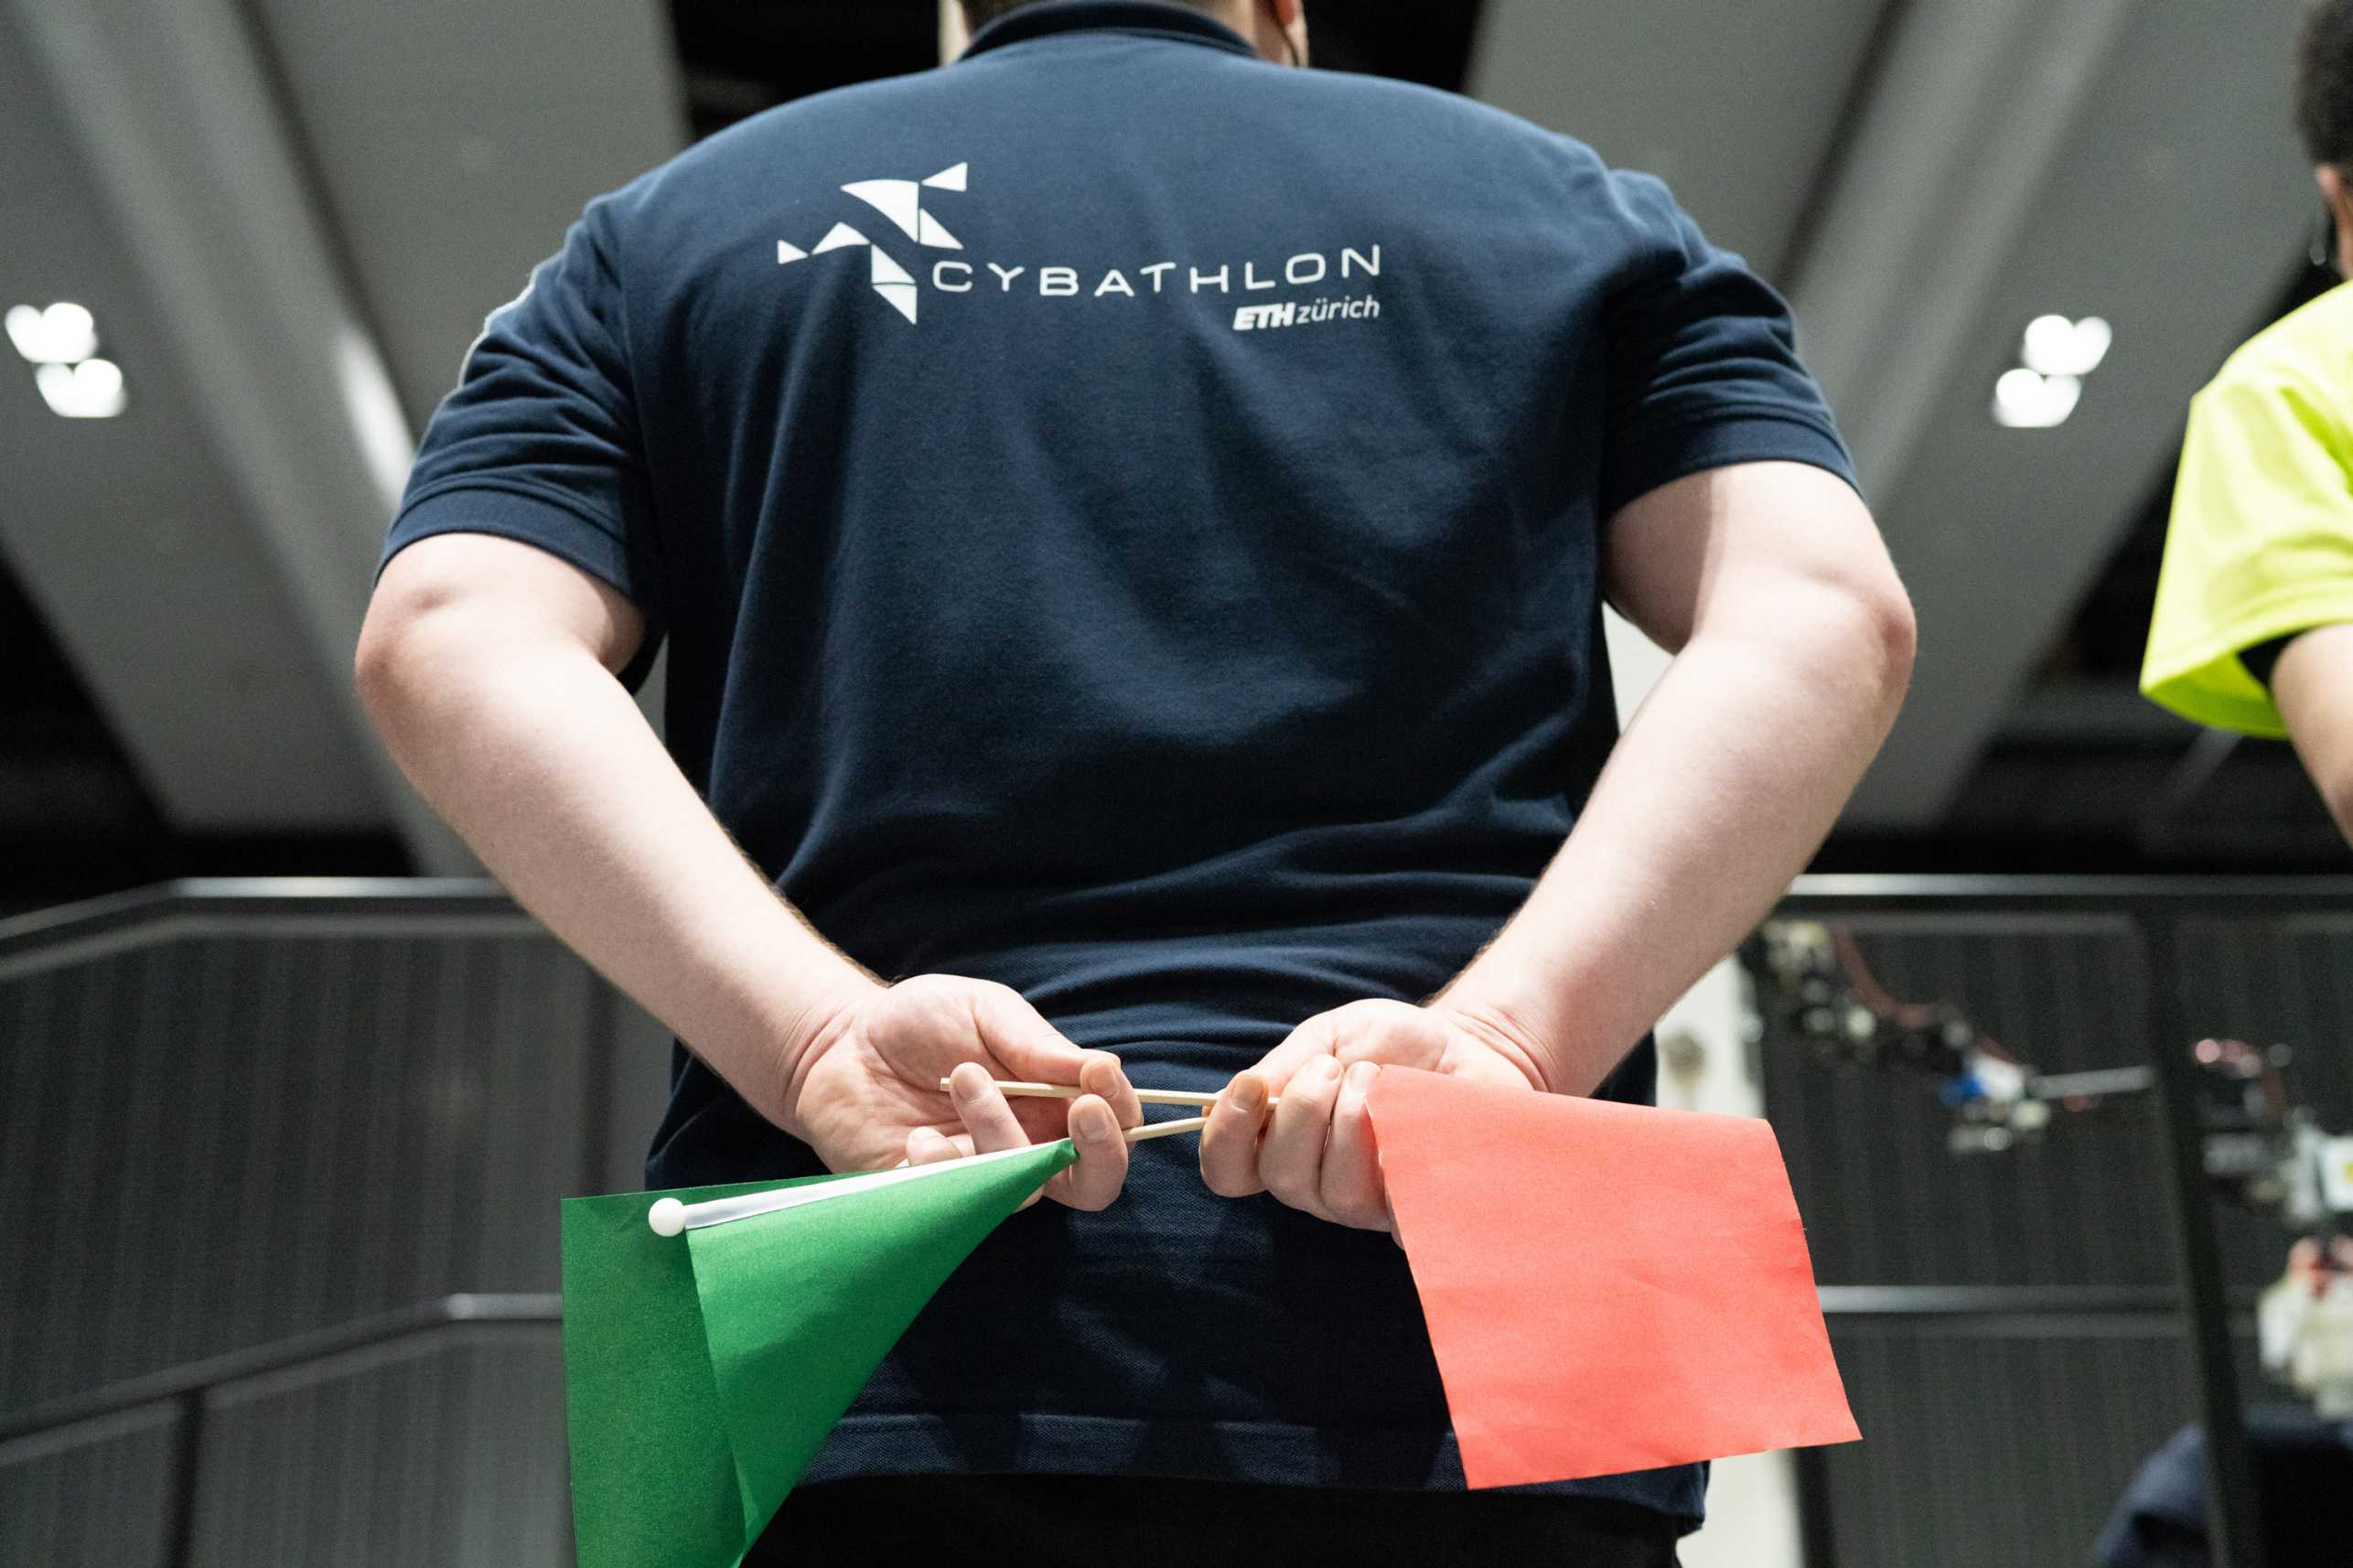 A man is seen from behind. He is wearing a Tshirt with the CYBATHLON and ETH Zurich logo. He is holding two flags; a green one and a red one. He appears to to a referee for the CYBATHLON games.